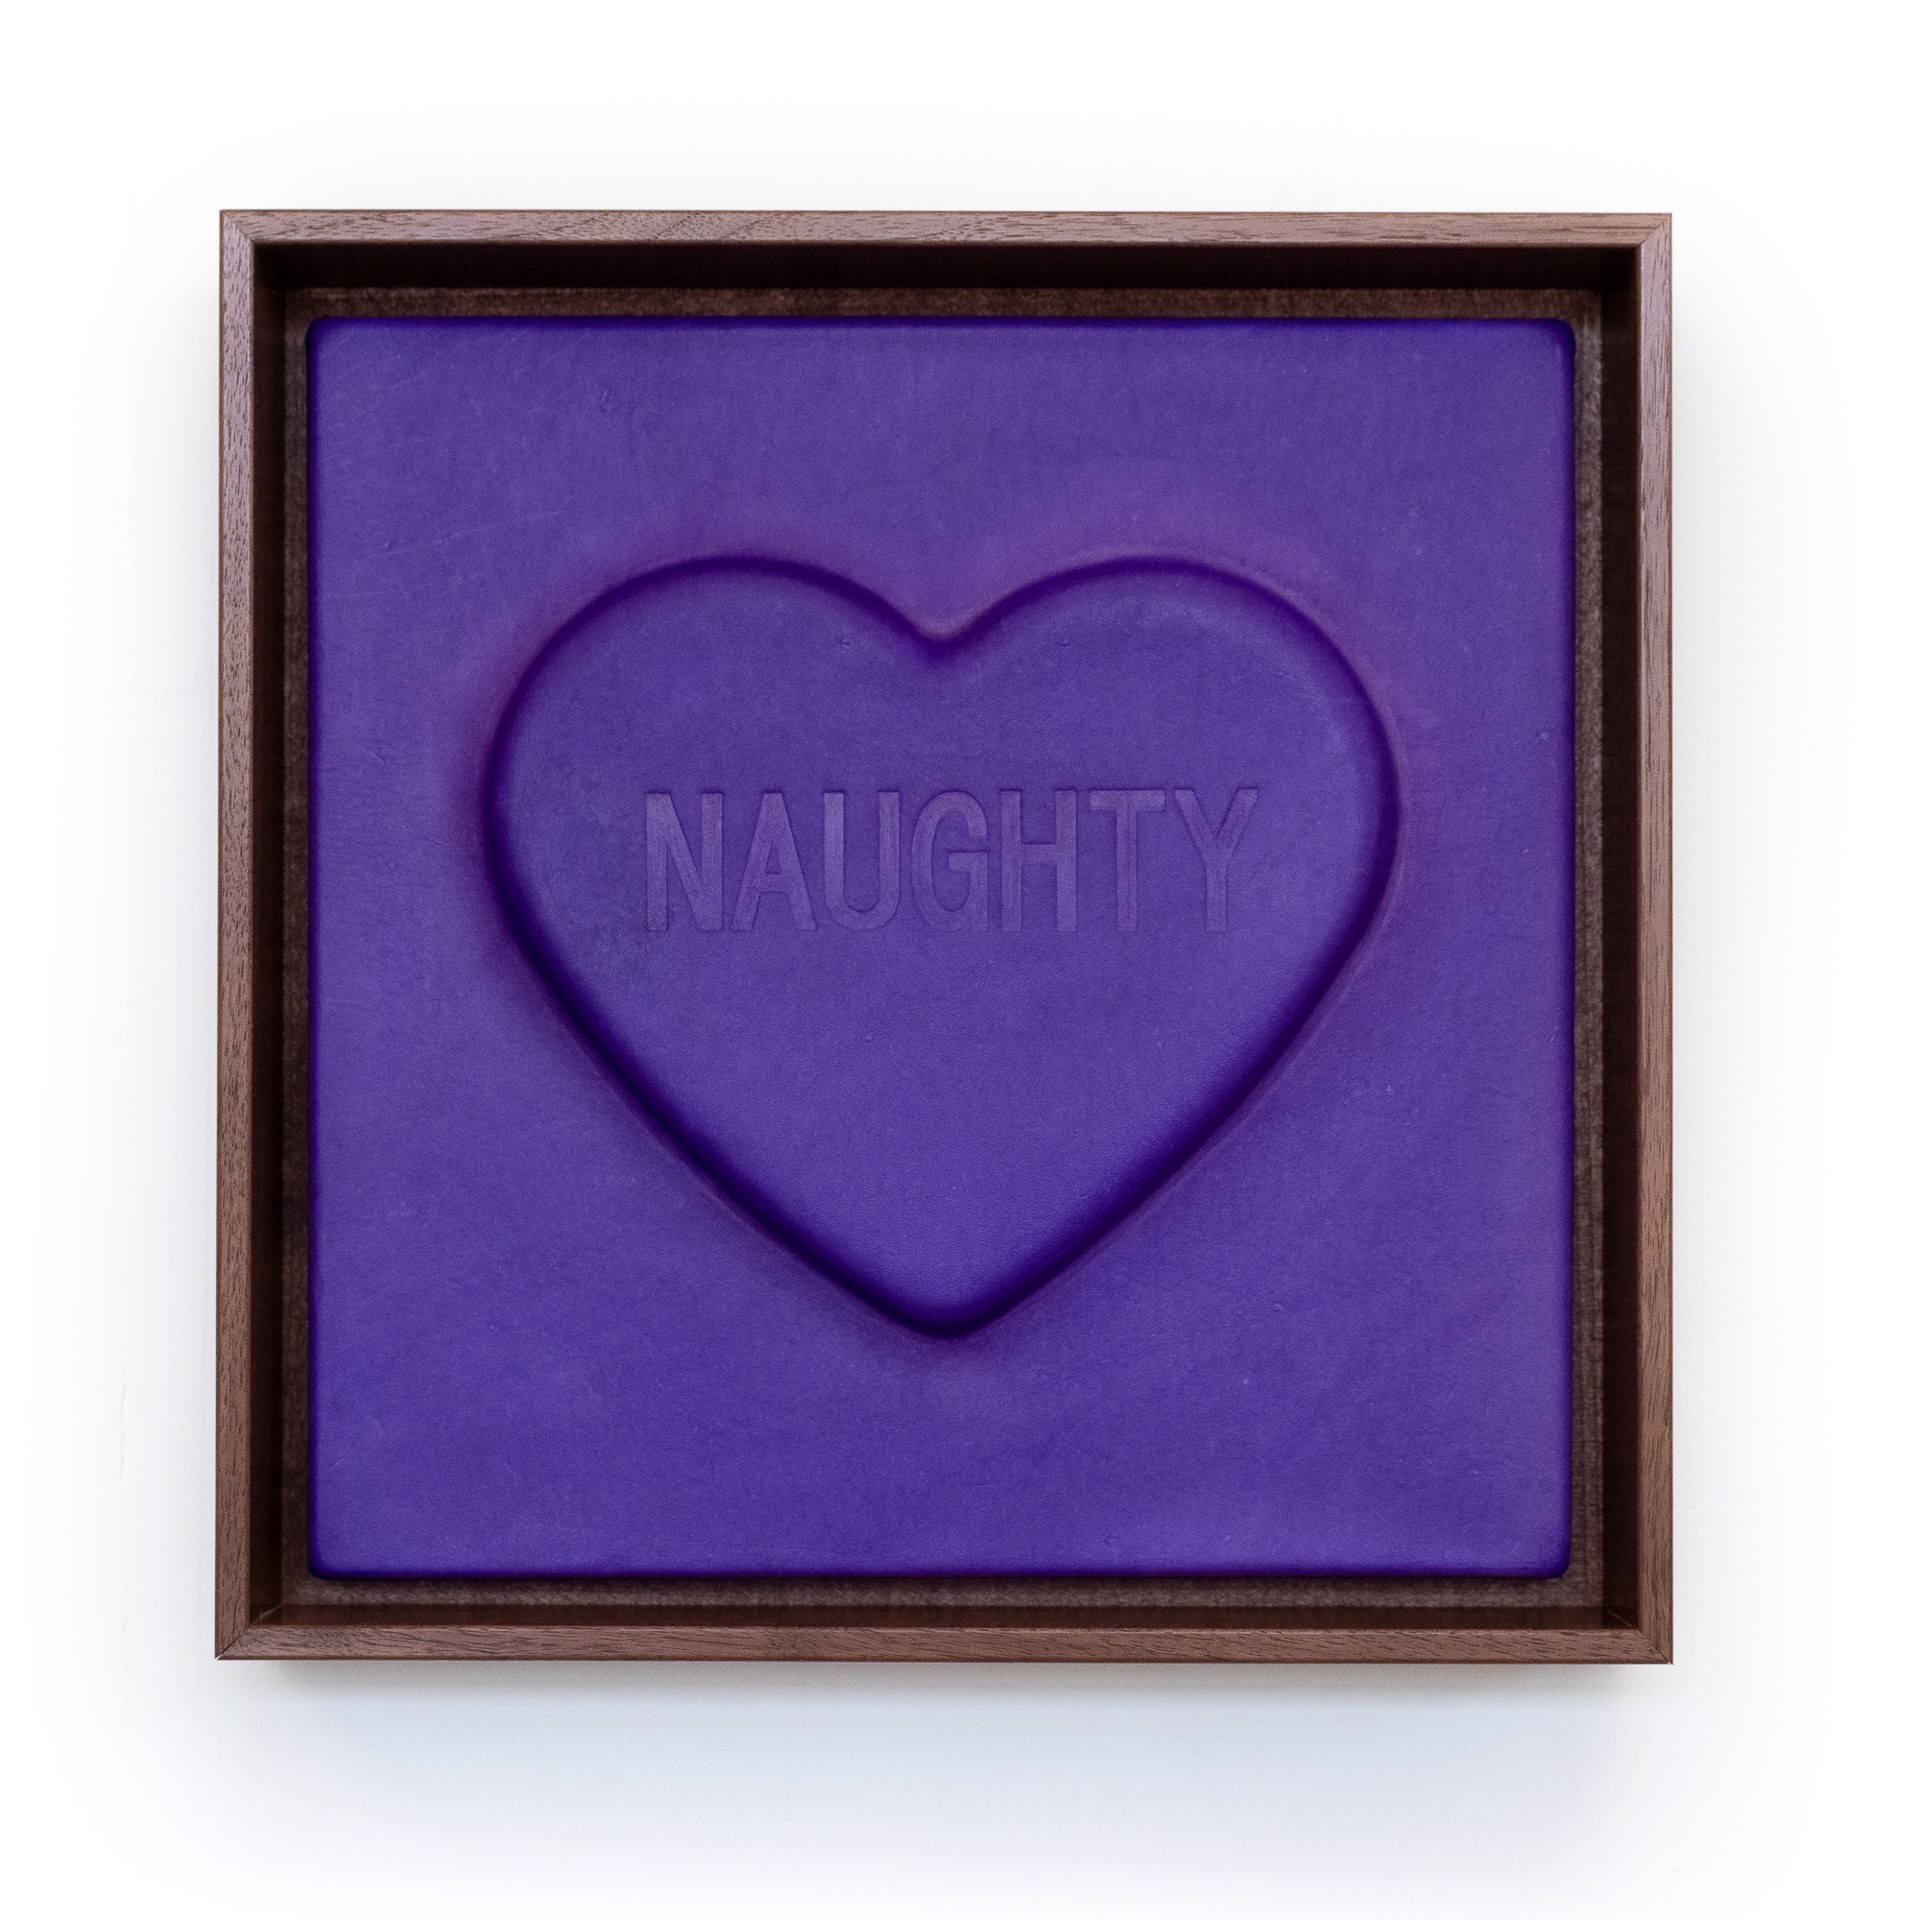 'Naughty' - Sweetheart series by Mx. Hyde